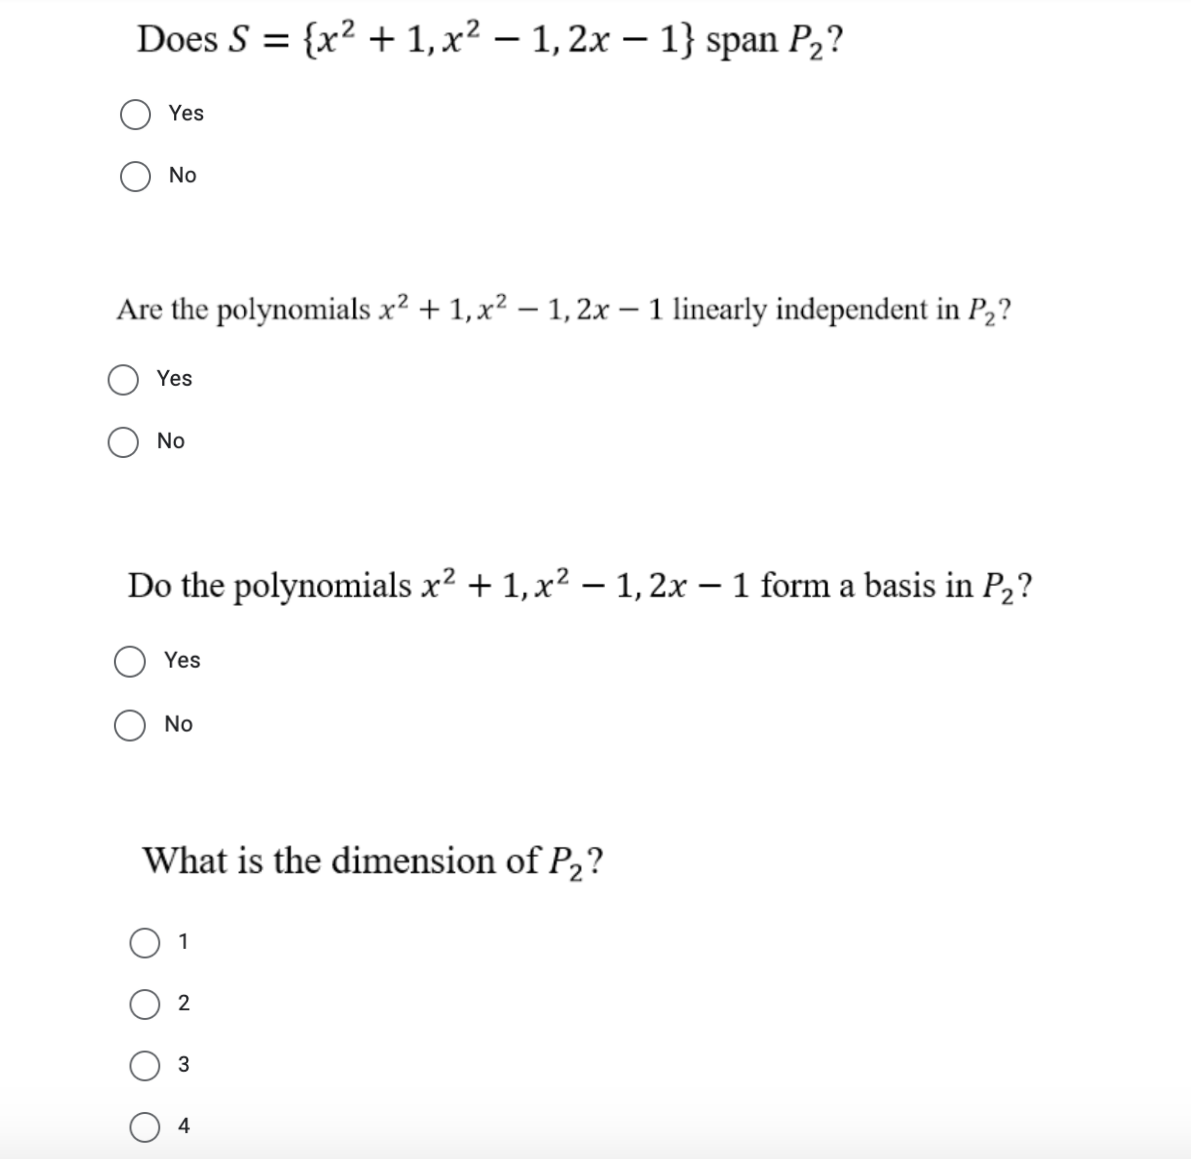 Does S = {x² +1,x² – 1, 2x – 1} span P2?
Yes
No
Are the polynomials x? + 1,x² – 1, 2x – 1 linearly independent in P2?
Yes
No
Do the polynomials x2 + 1,x2 – 1,2x – 1 form a basis in P2?
|
Yes
No
What is the dimension of P2?
1
2
4
